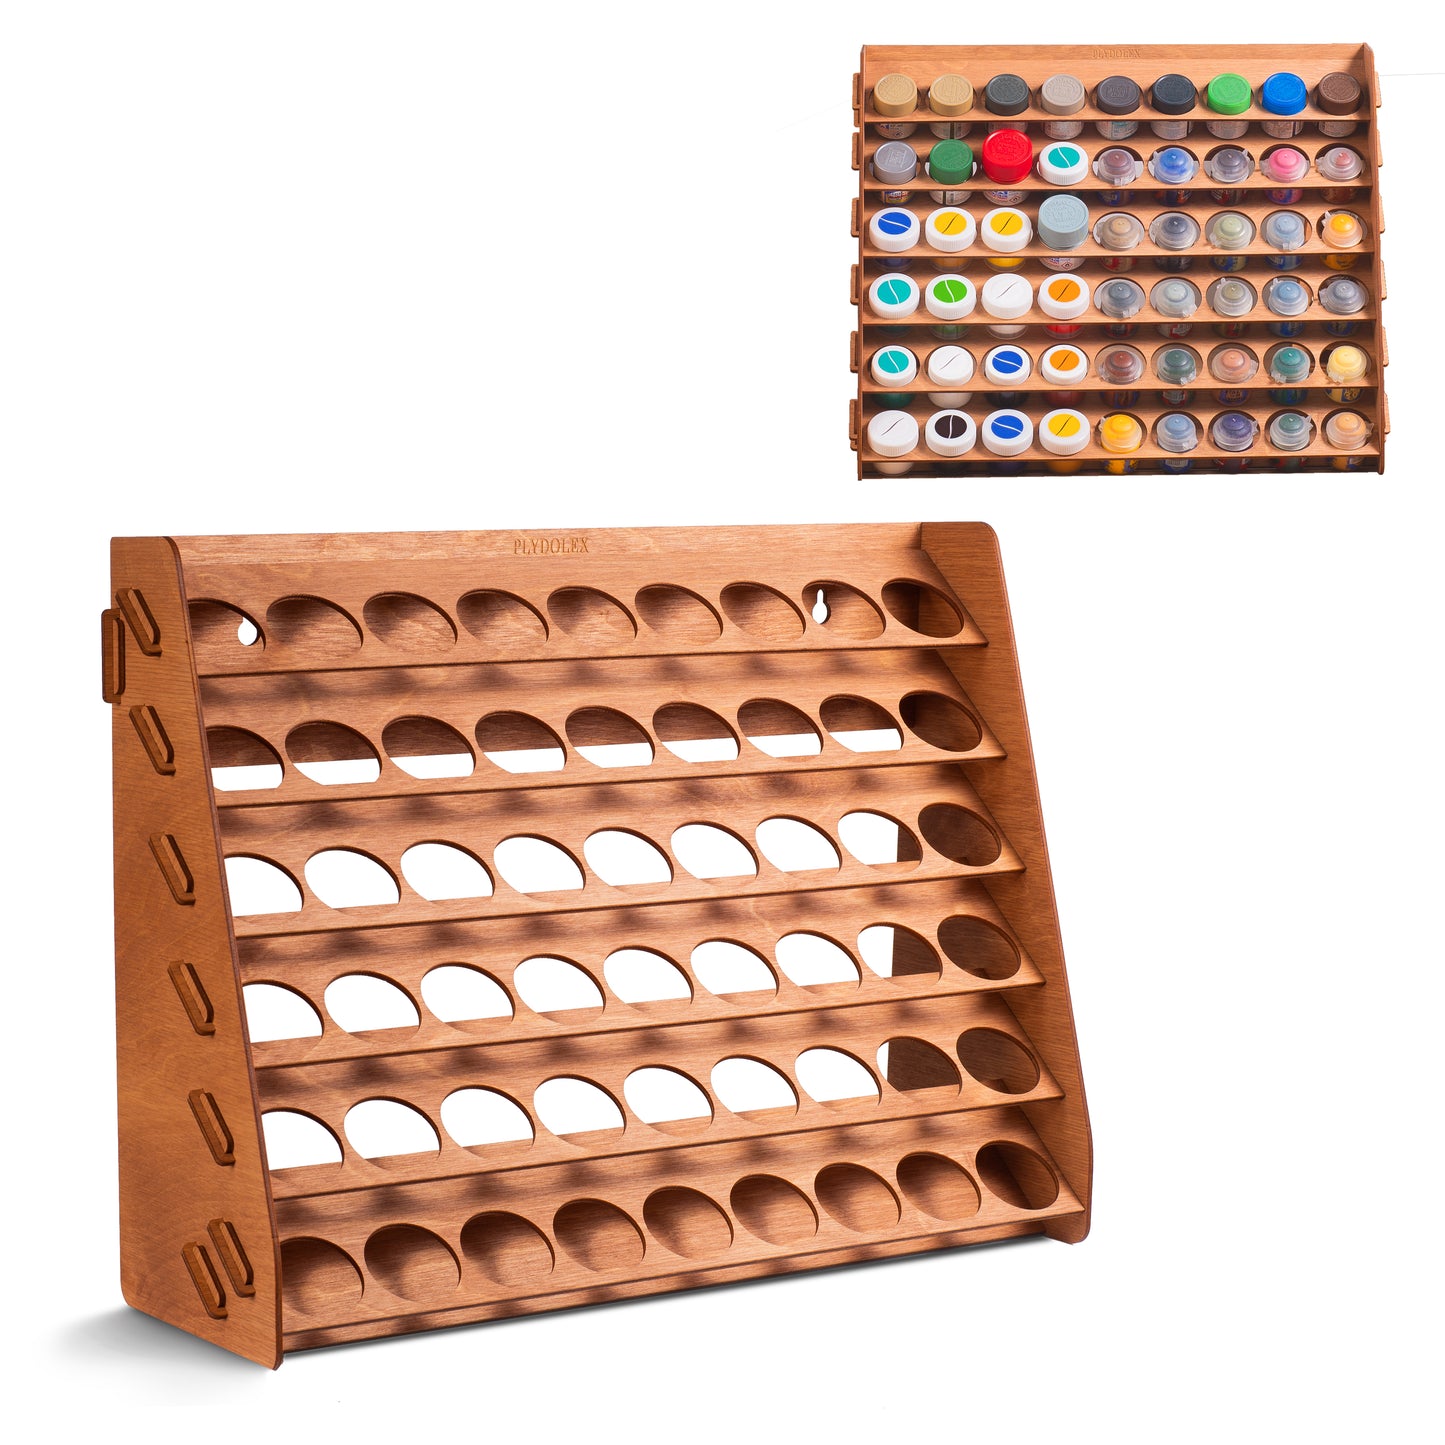 Plydolex Tamiya Paint Rack Organizer with 54 Holes for Miniature Paint Set - Wall-mounted Wooden Craft Paint Storage Rack - Craft Paint Holder Rack 16x5.2x12.6 inch